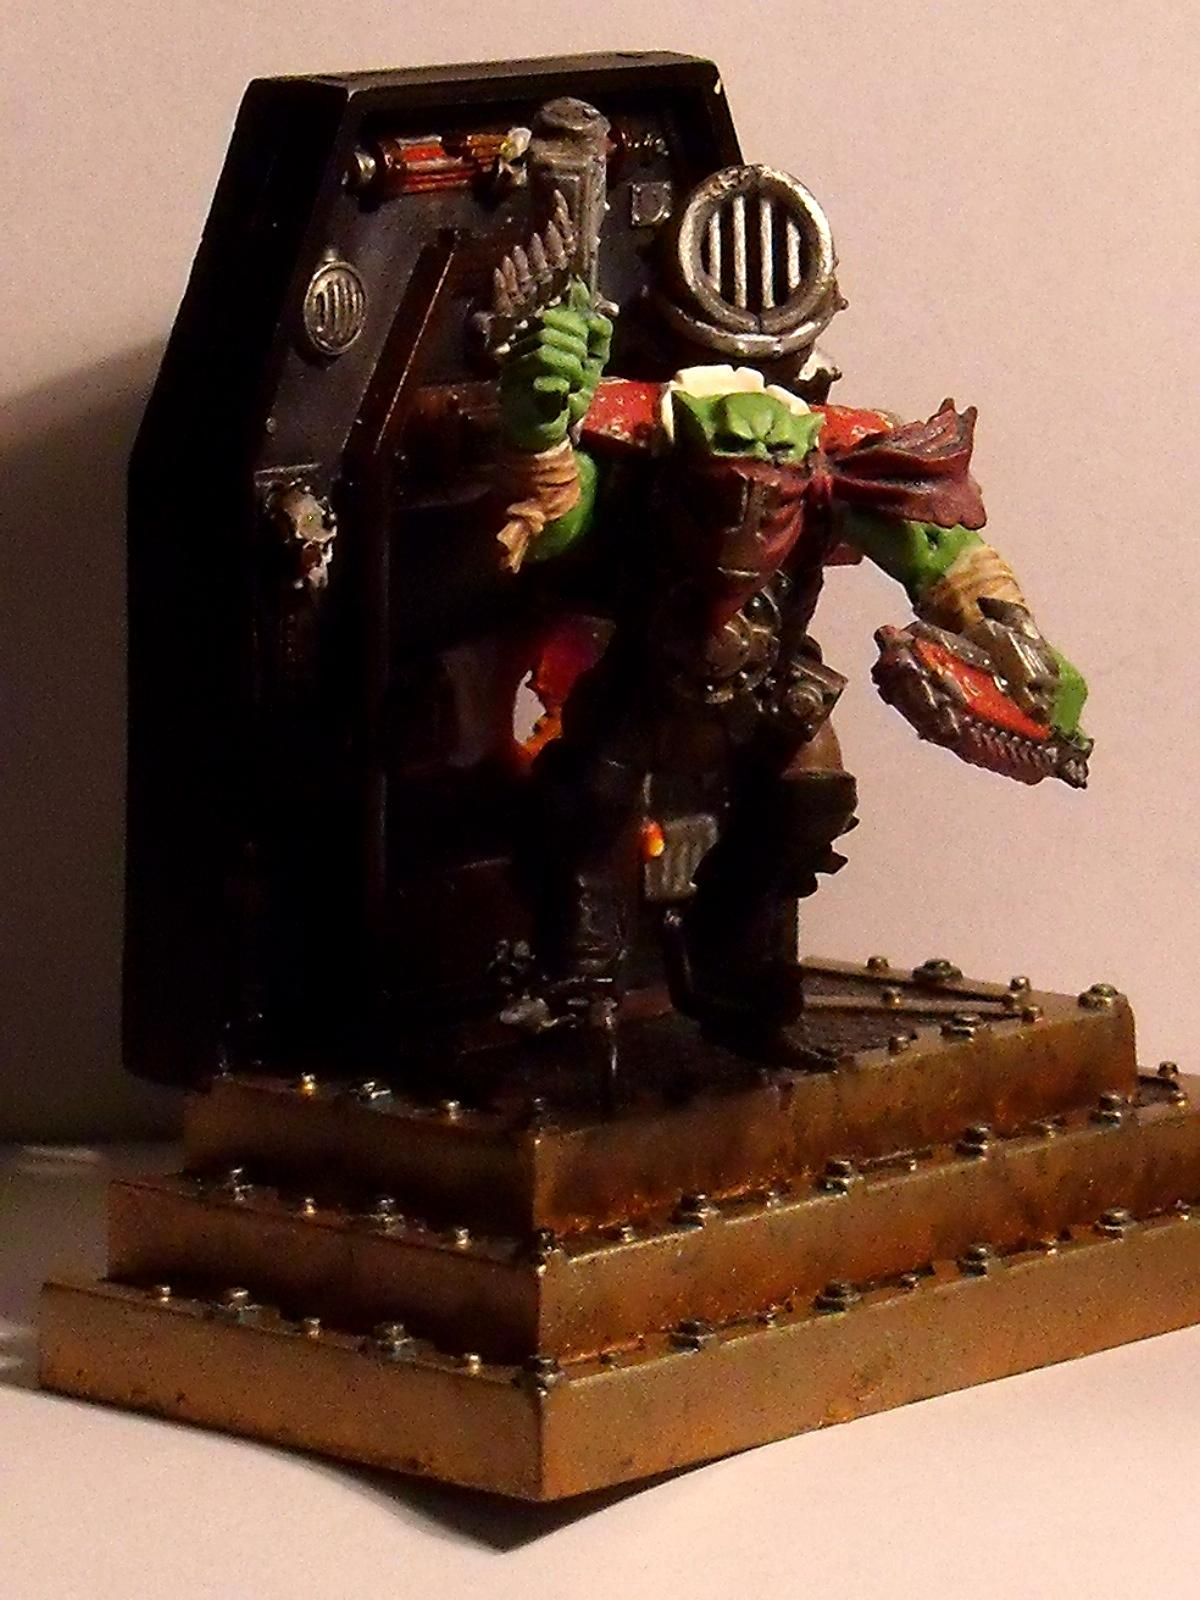 Orks, Single Projects, Stormboy, Warhammer 40,000